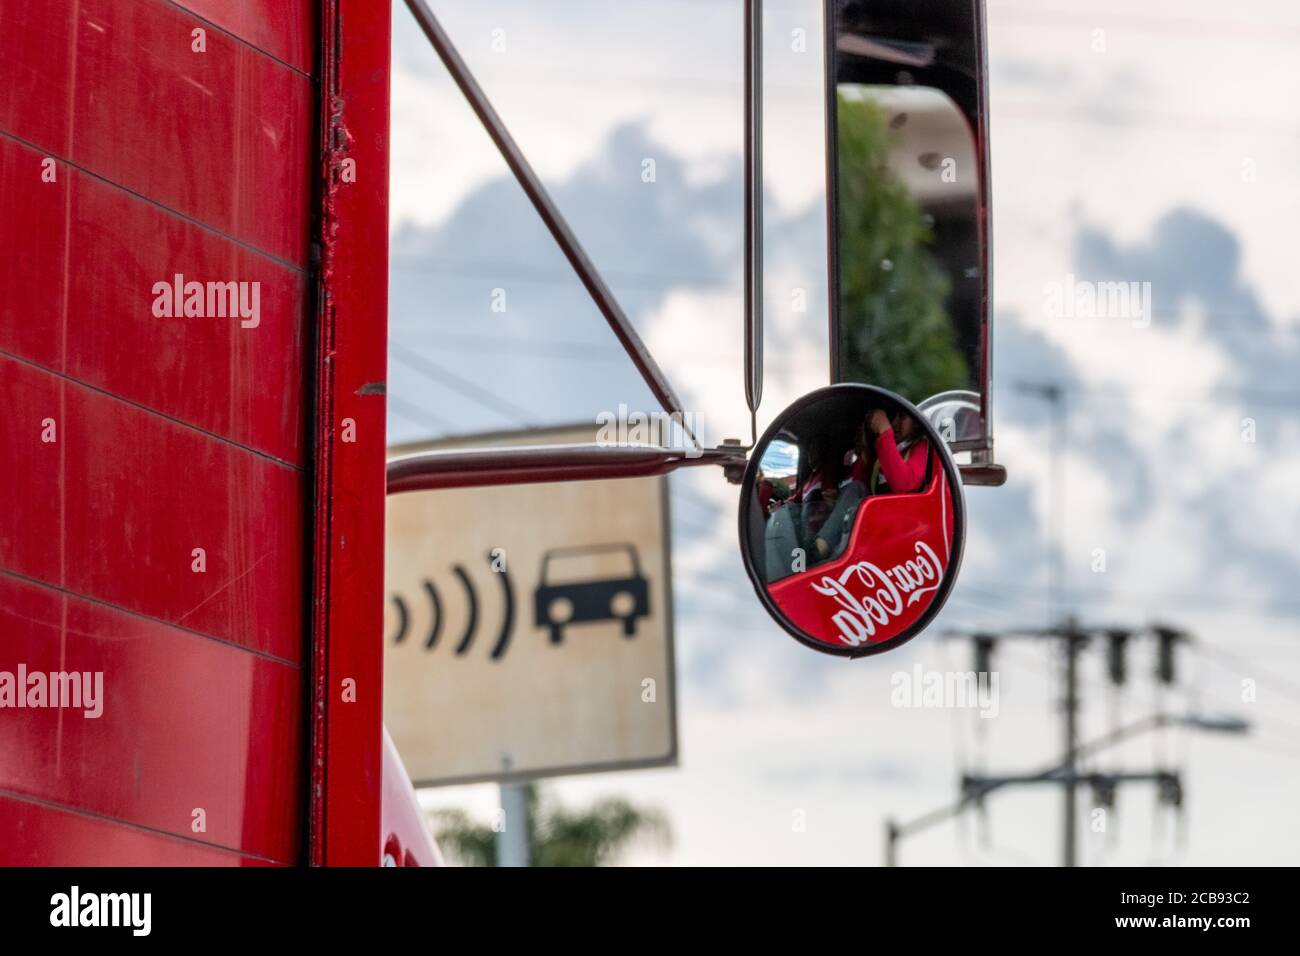 Coca cola company logo image. reflected in the rear view mirror of a delivery truck. urban scene Stock Photo